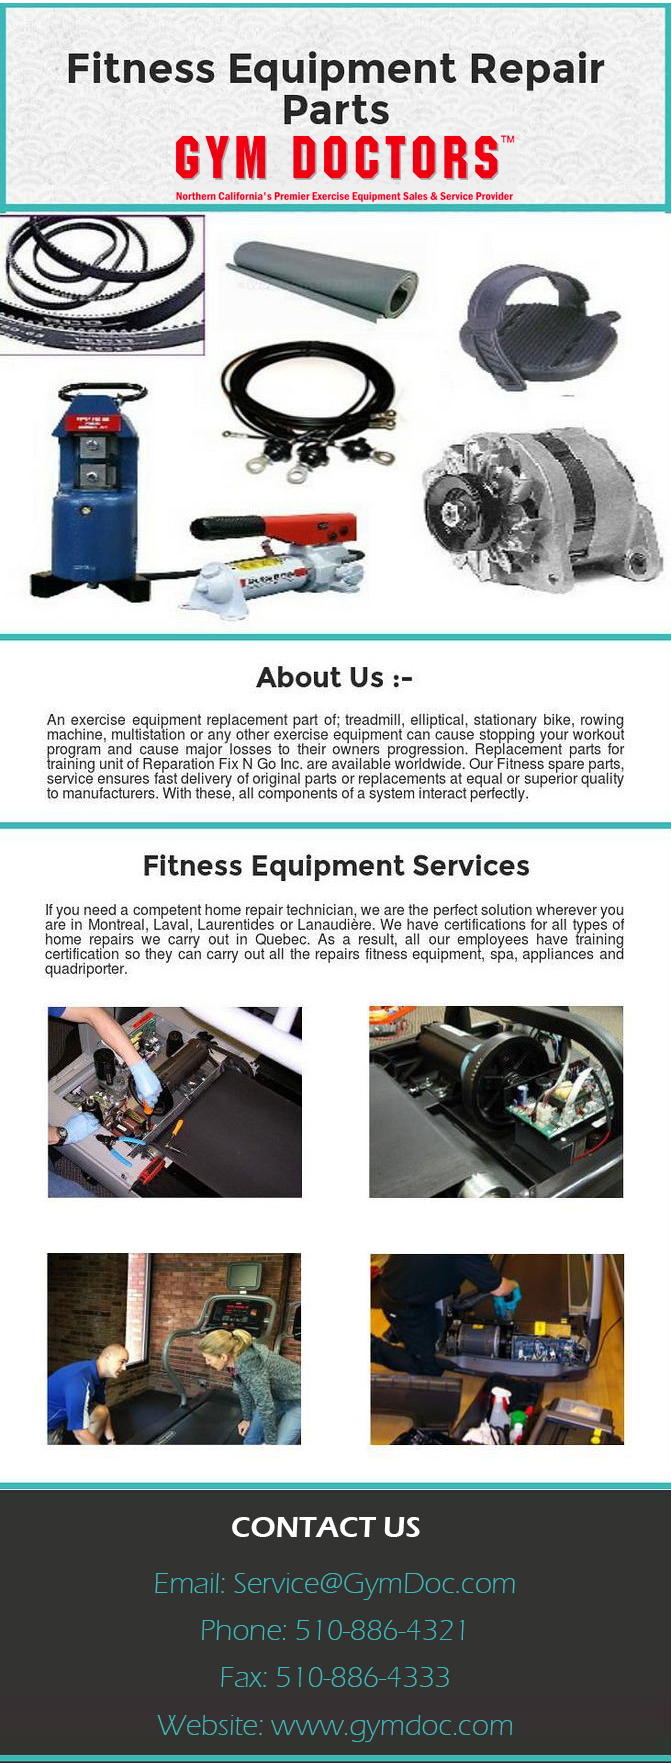 Fitness Equipment Repair We have the lowest prices in the Fitness equipment repair service we carry, and we gaurantee it. we repair any and all exercise and fitness equipment and specialize in cardio equipment repair service. For more info at https://www.gymdoc.com/ by gymdoctors